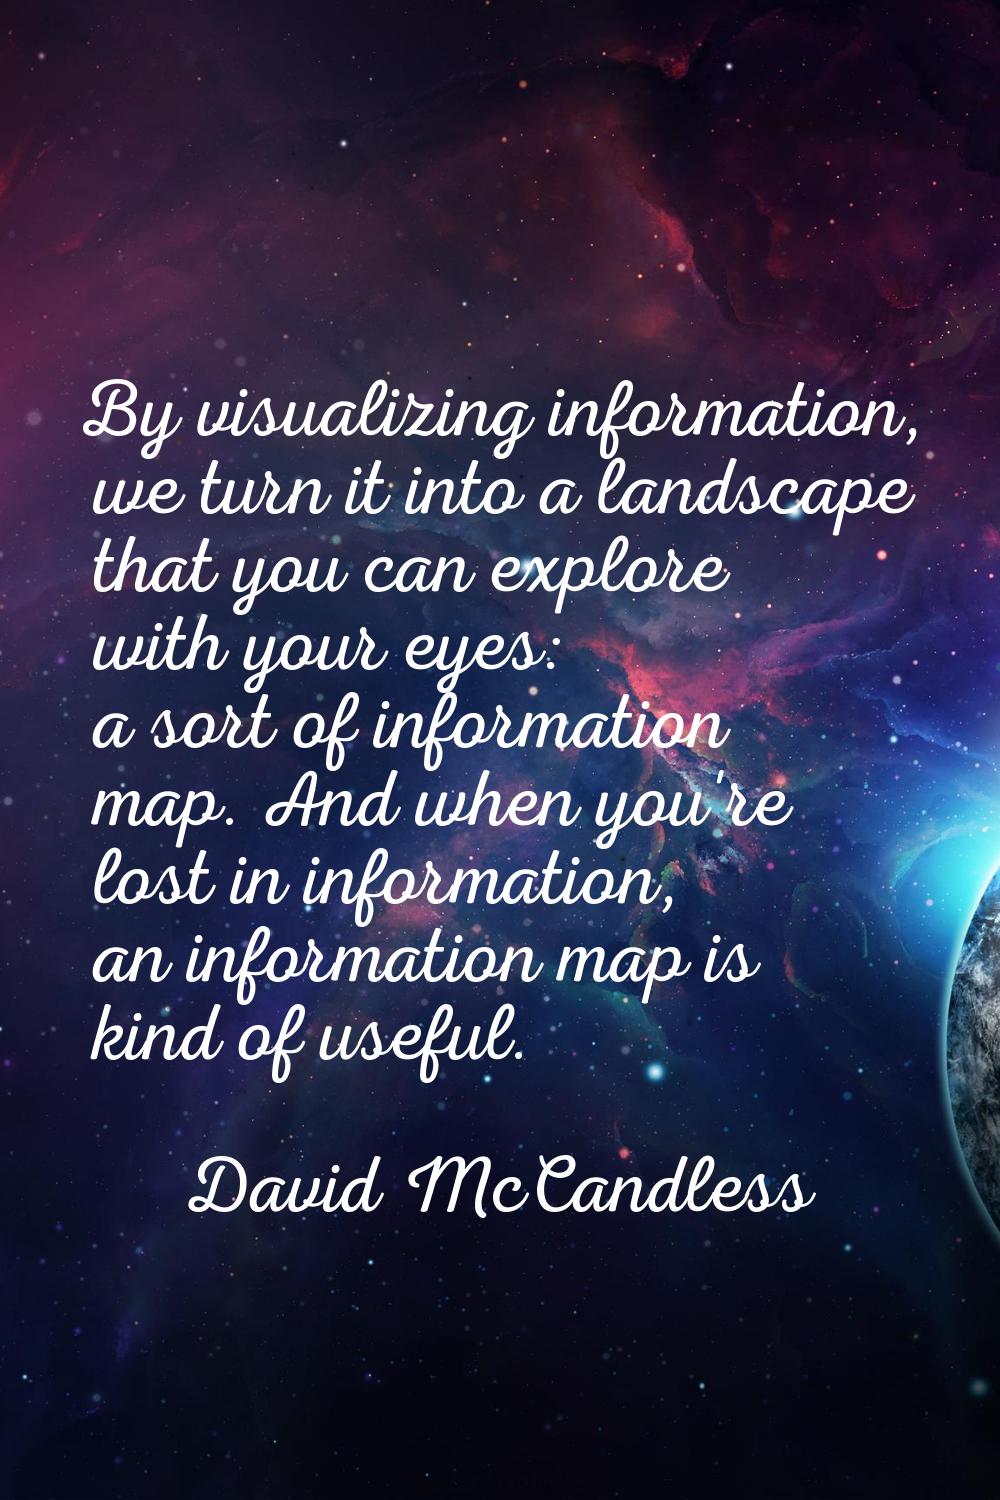 By visualizing information, we turn it into a landscape that you can explore with your eyes: a sort